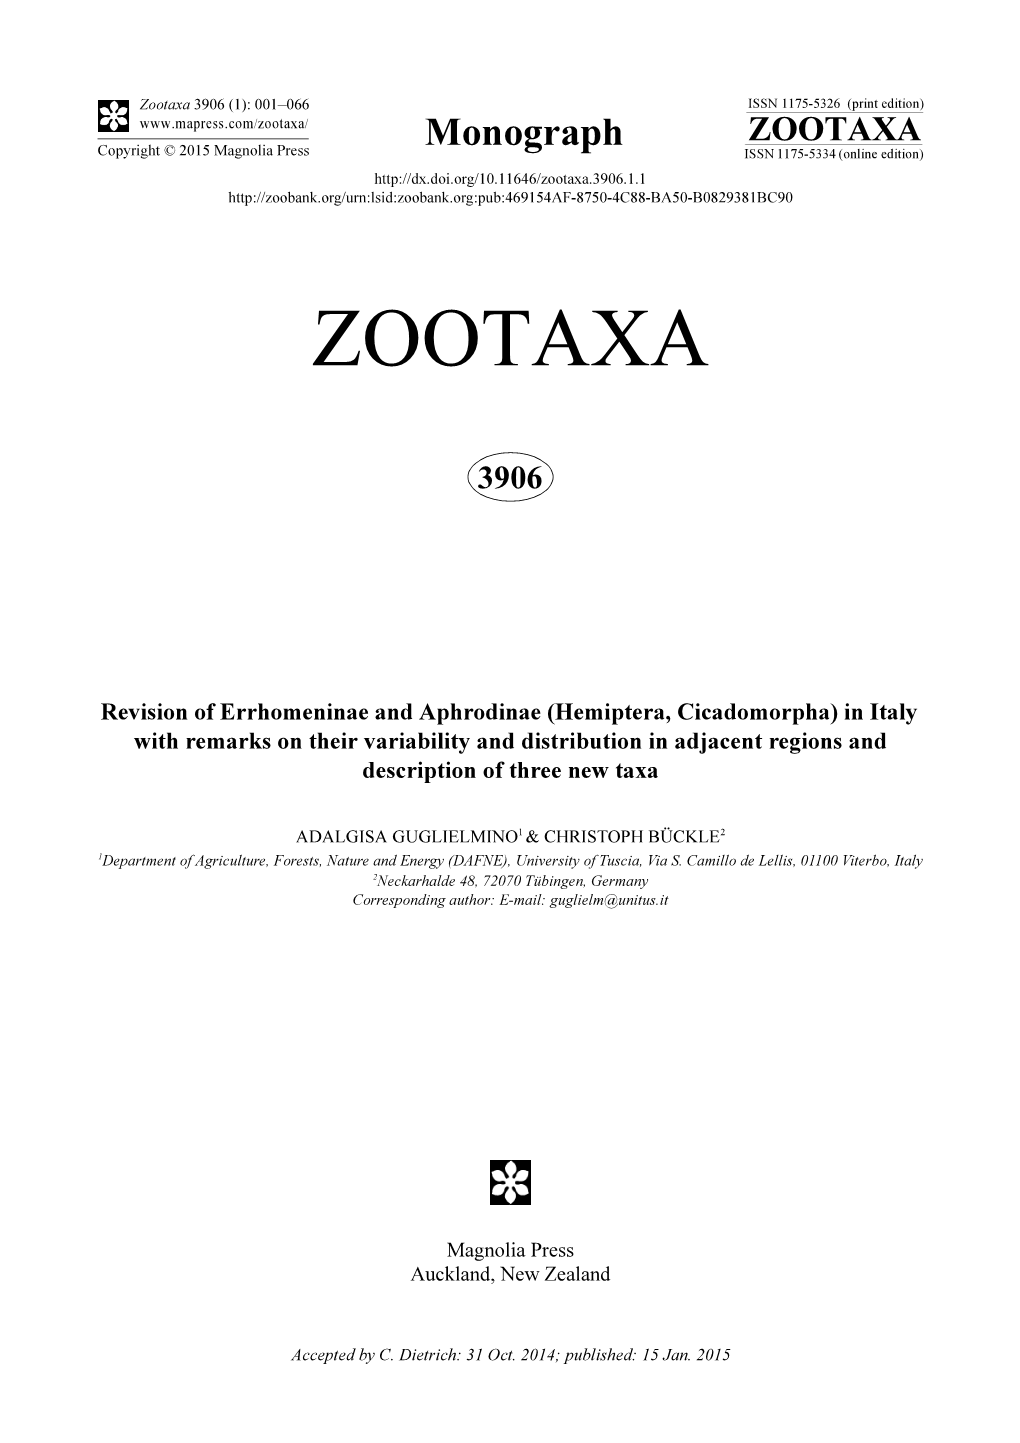 Hemiptera, Cicadomorpha) in Italy with Remarks on Their Variability and Distribution in Adjacent Regions and Description of Three New Taxa